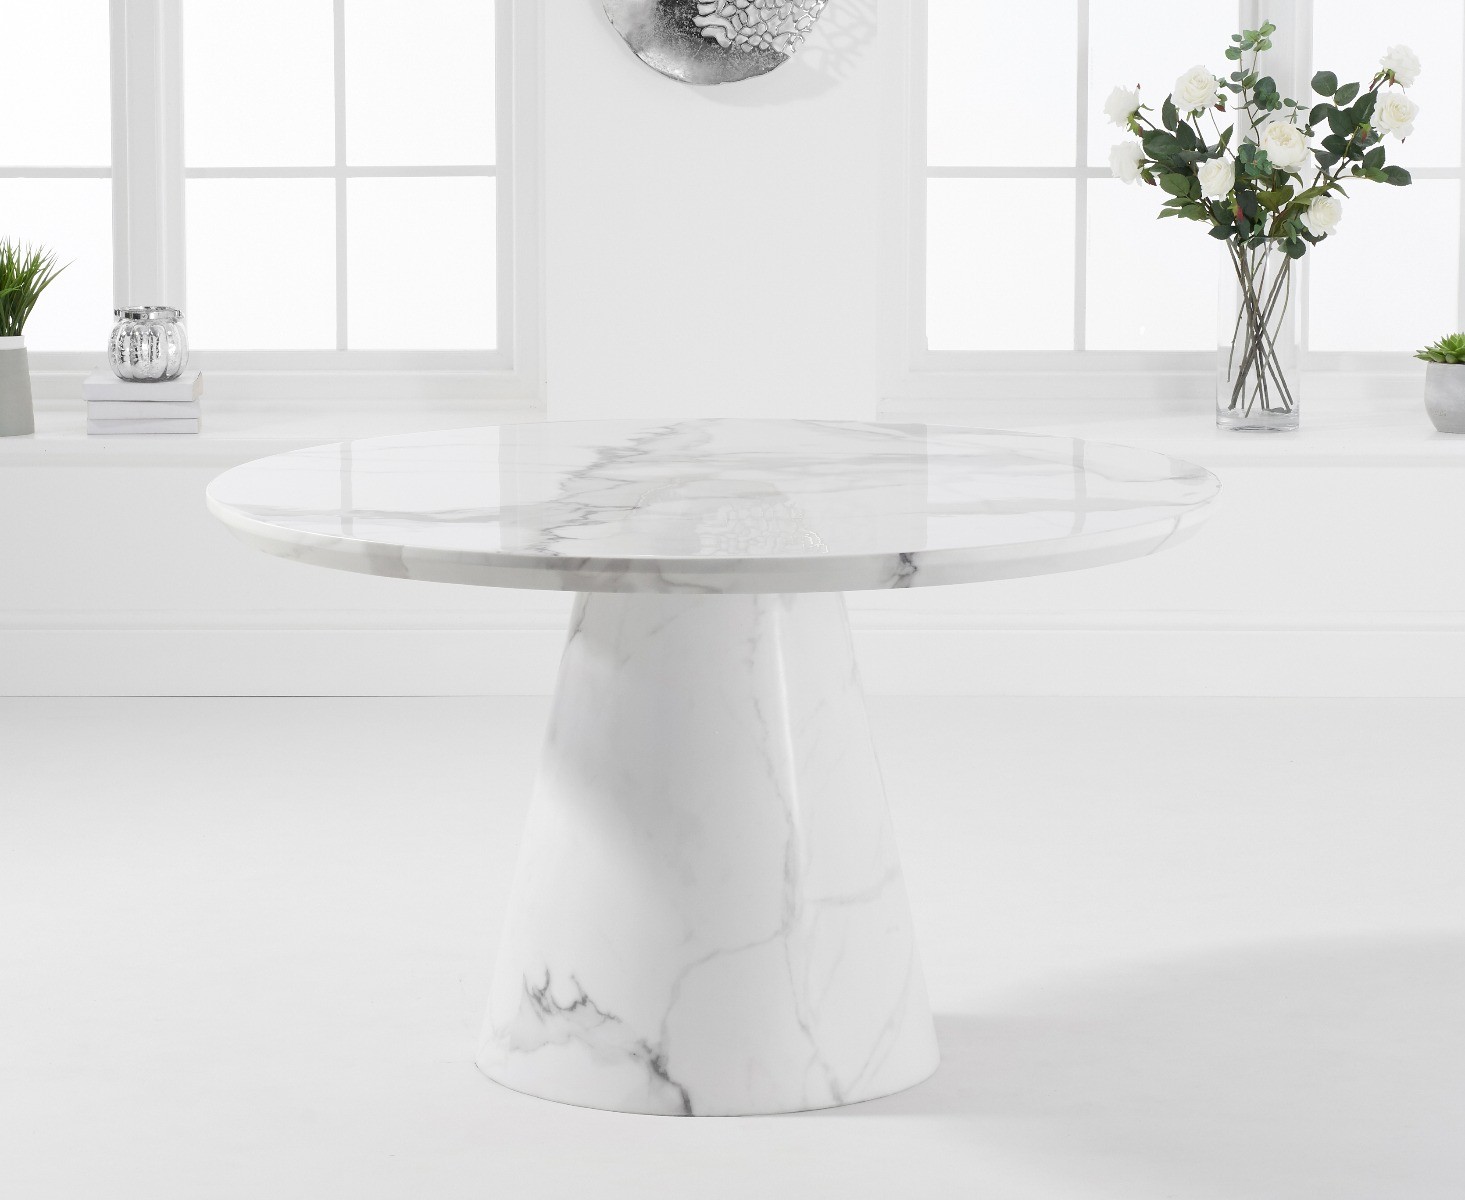 Photo 1 of Ravello 130cm round white marble dining table with 6 black aldo chairs